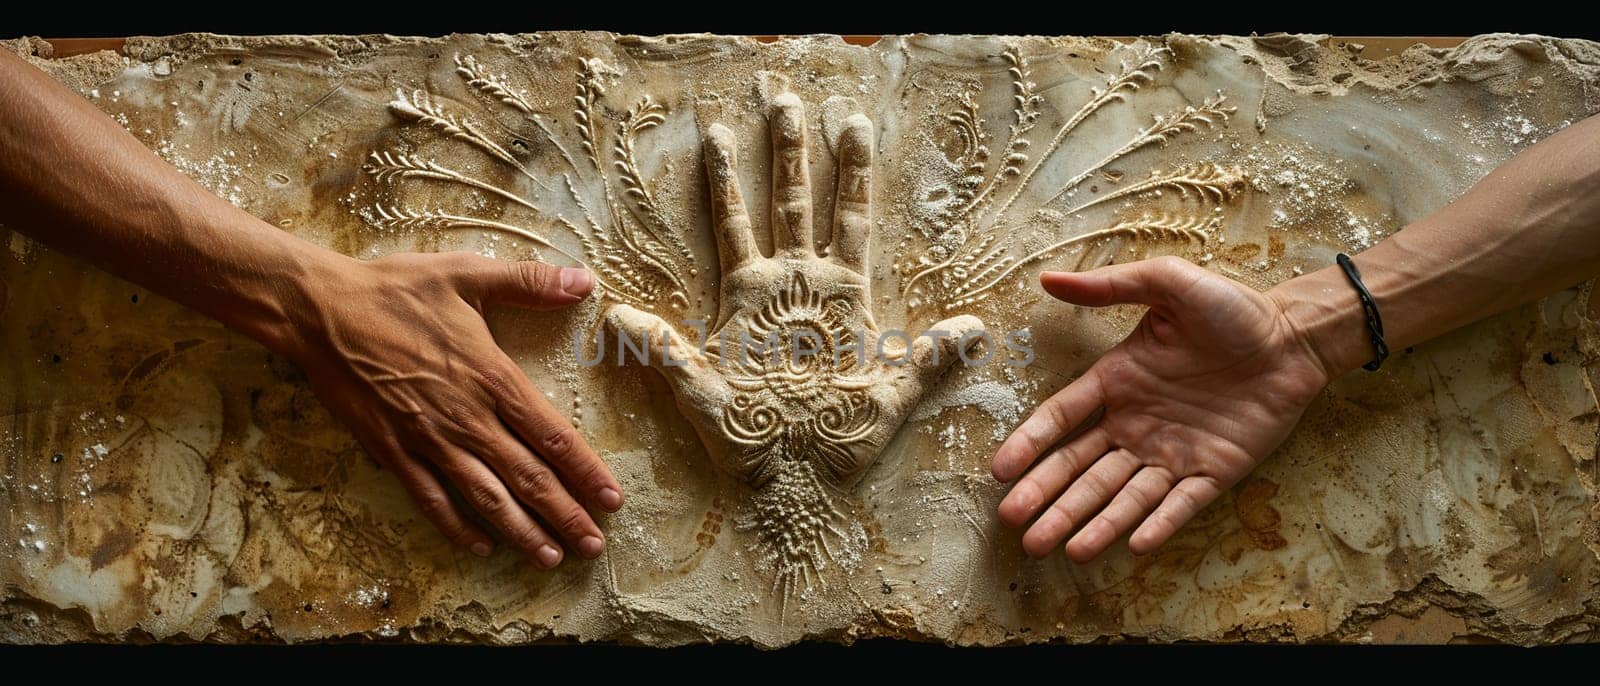 Vodou Veve Symbols Drawn in Flour for a Ceremony The intricate lines spread out by Benzoix